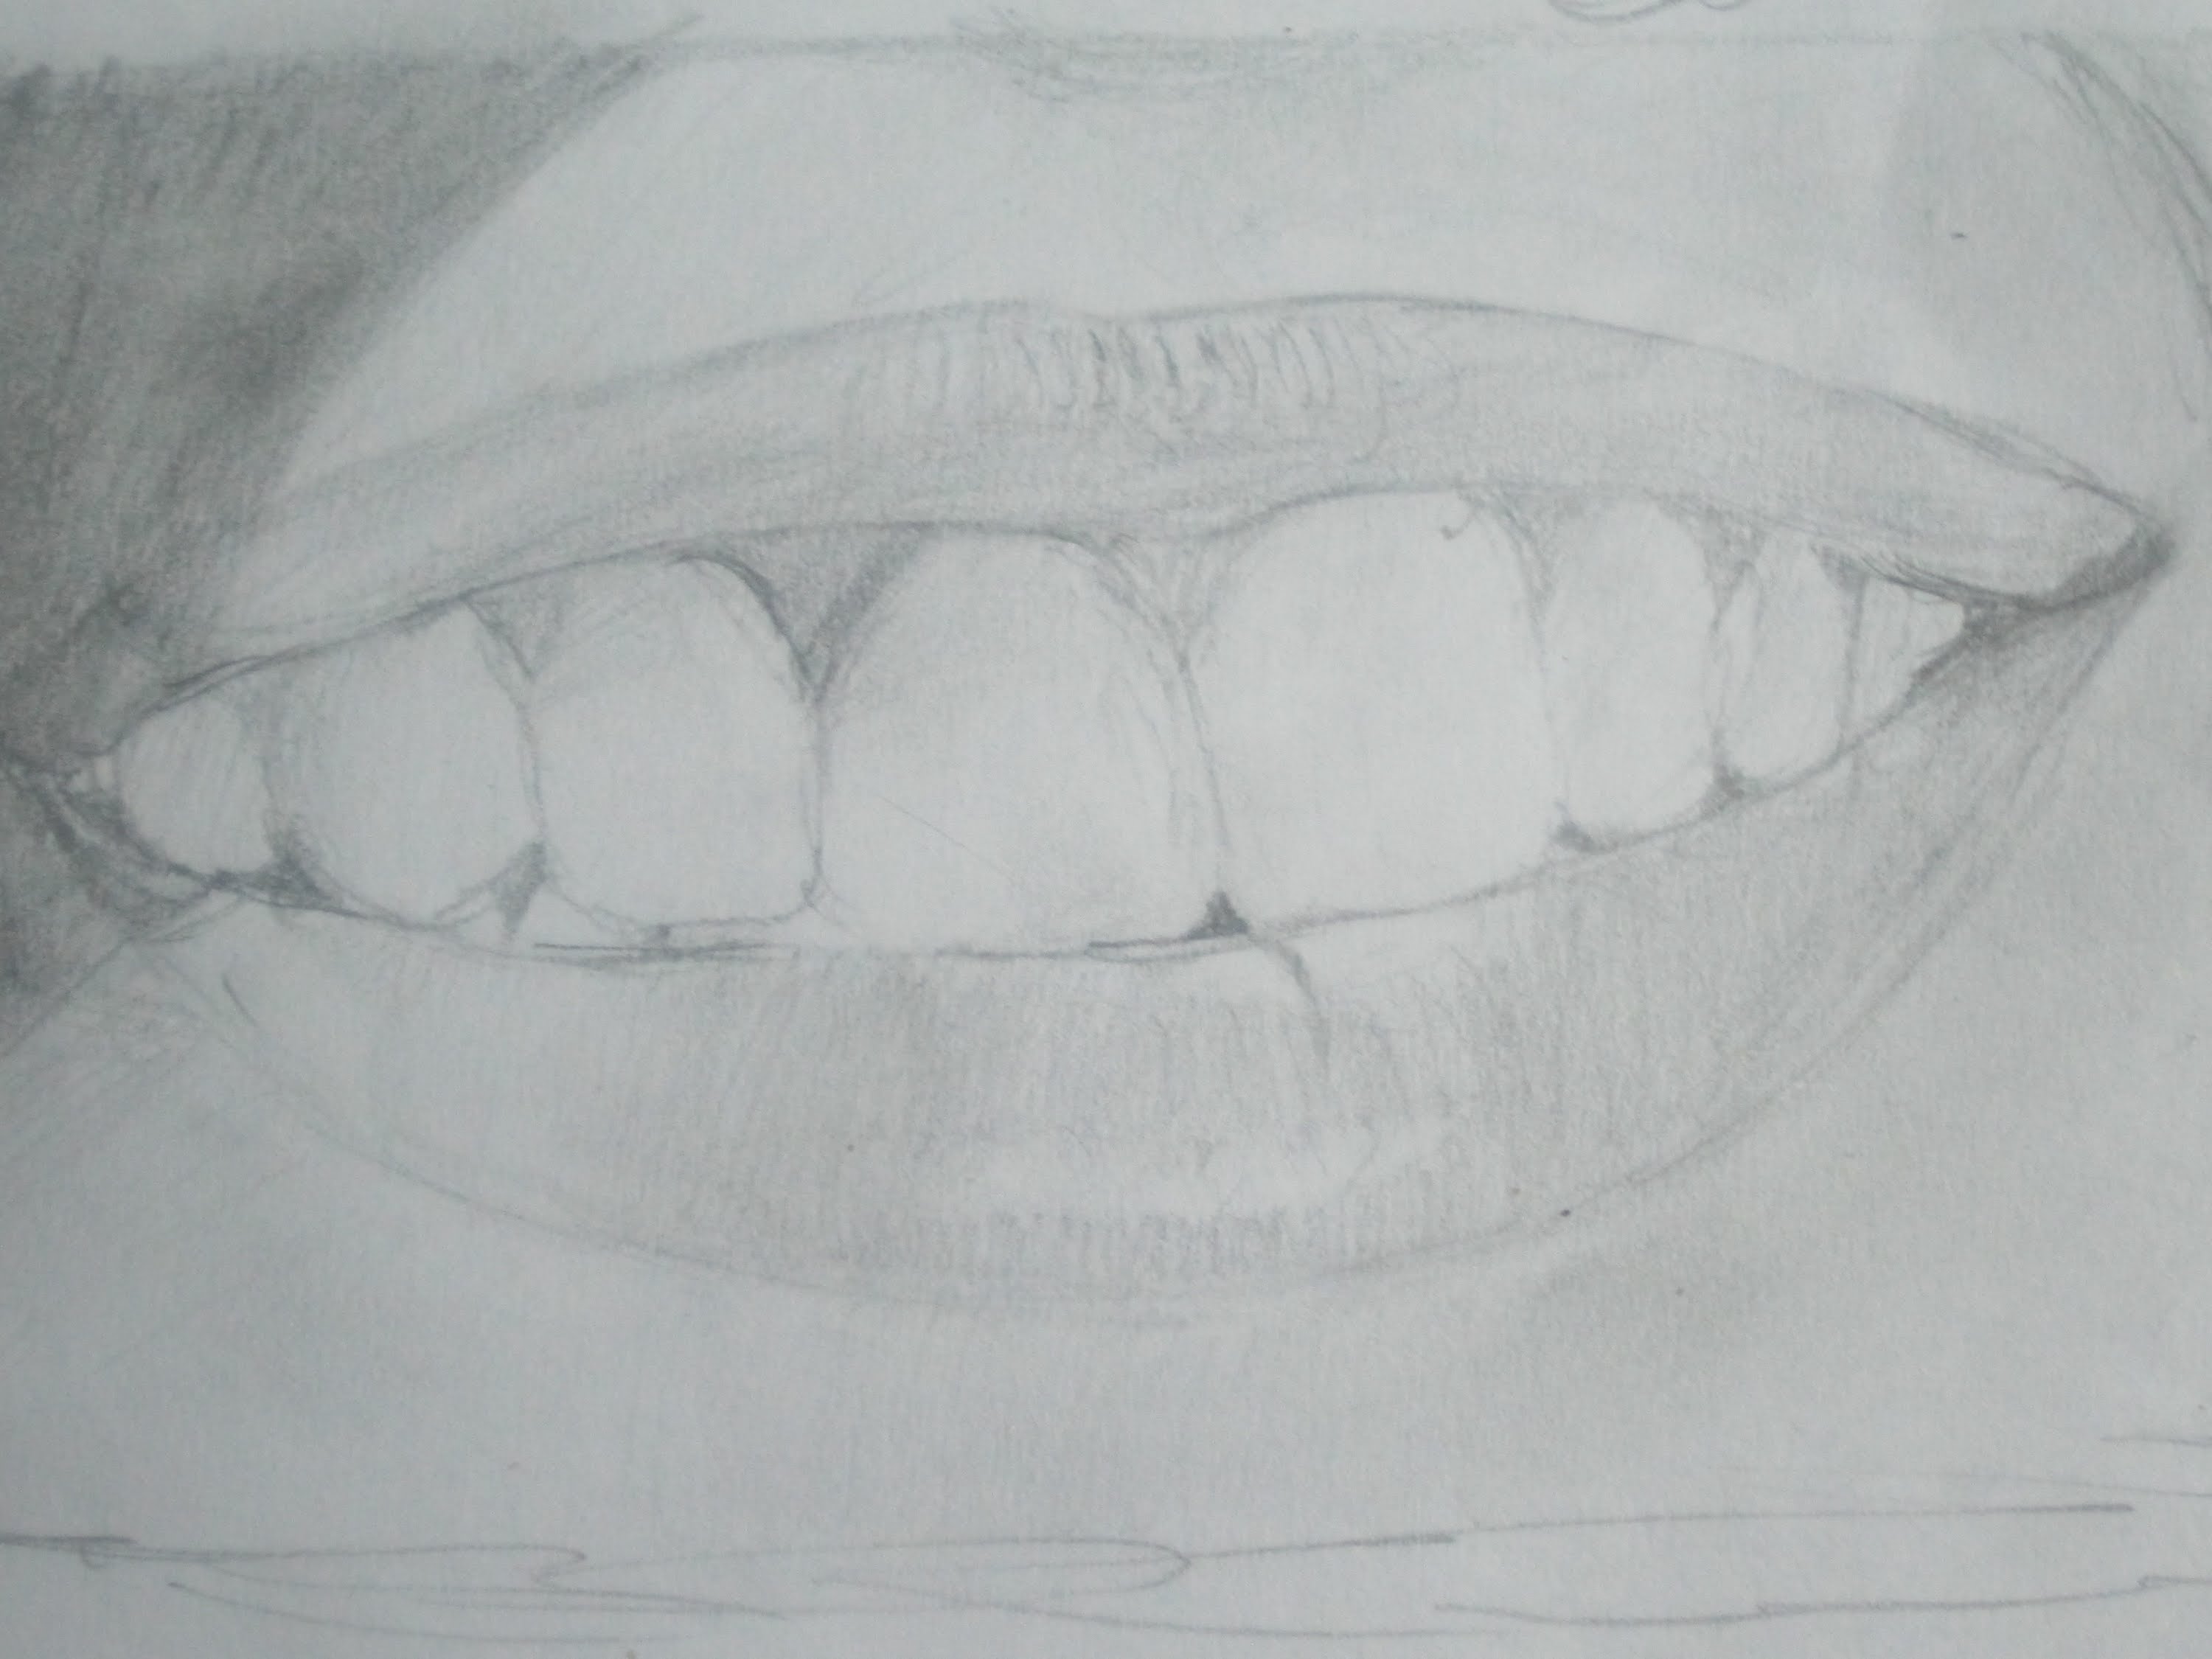 How to draw lips, Male, female, smiling, from the side